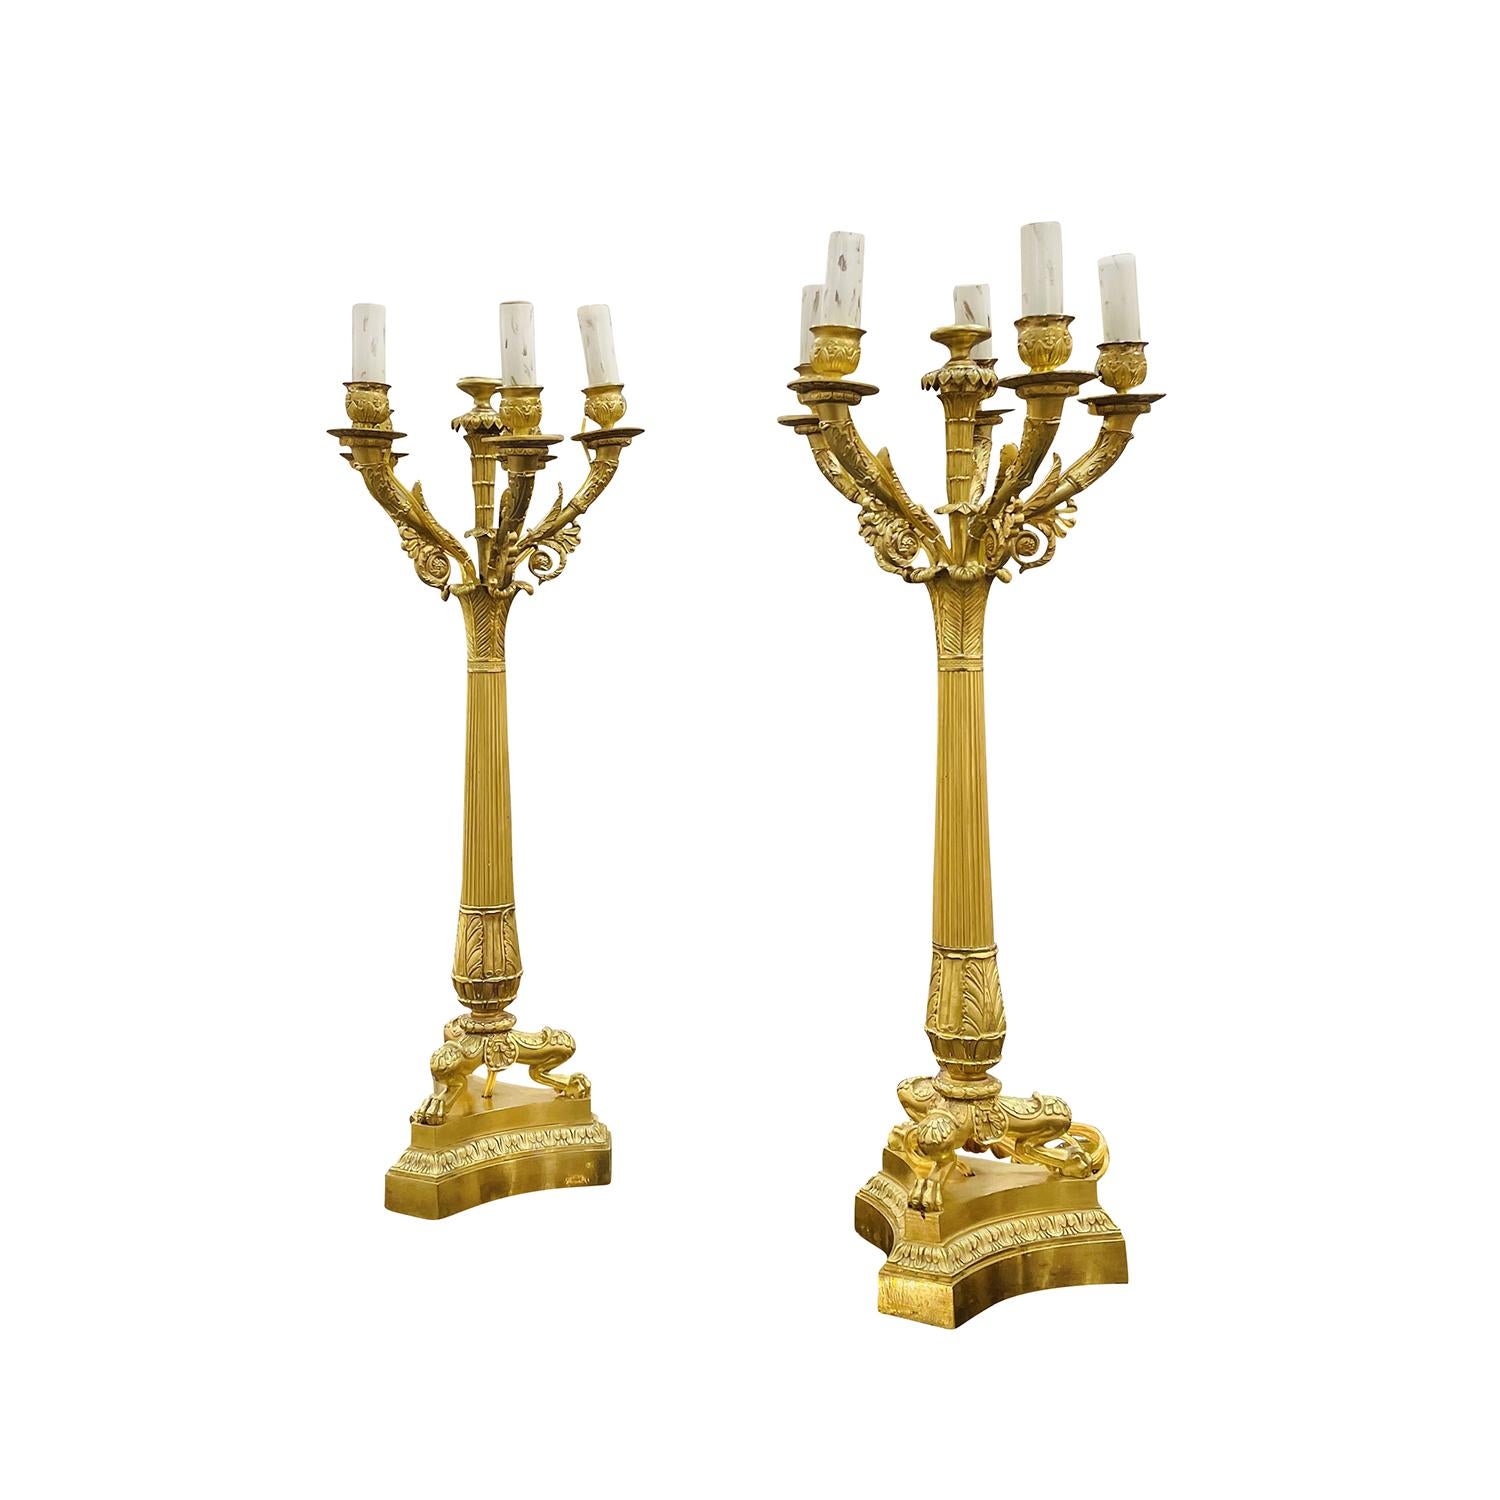 19th Century French Pair of Charles X Bronze Candle Holders - Antique Lights In Good Condition For Sale In West Palm Beach, FL